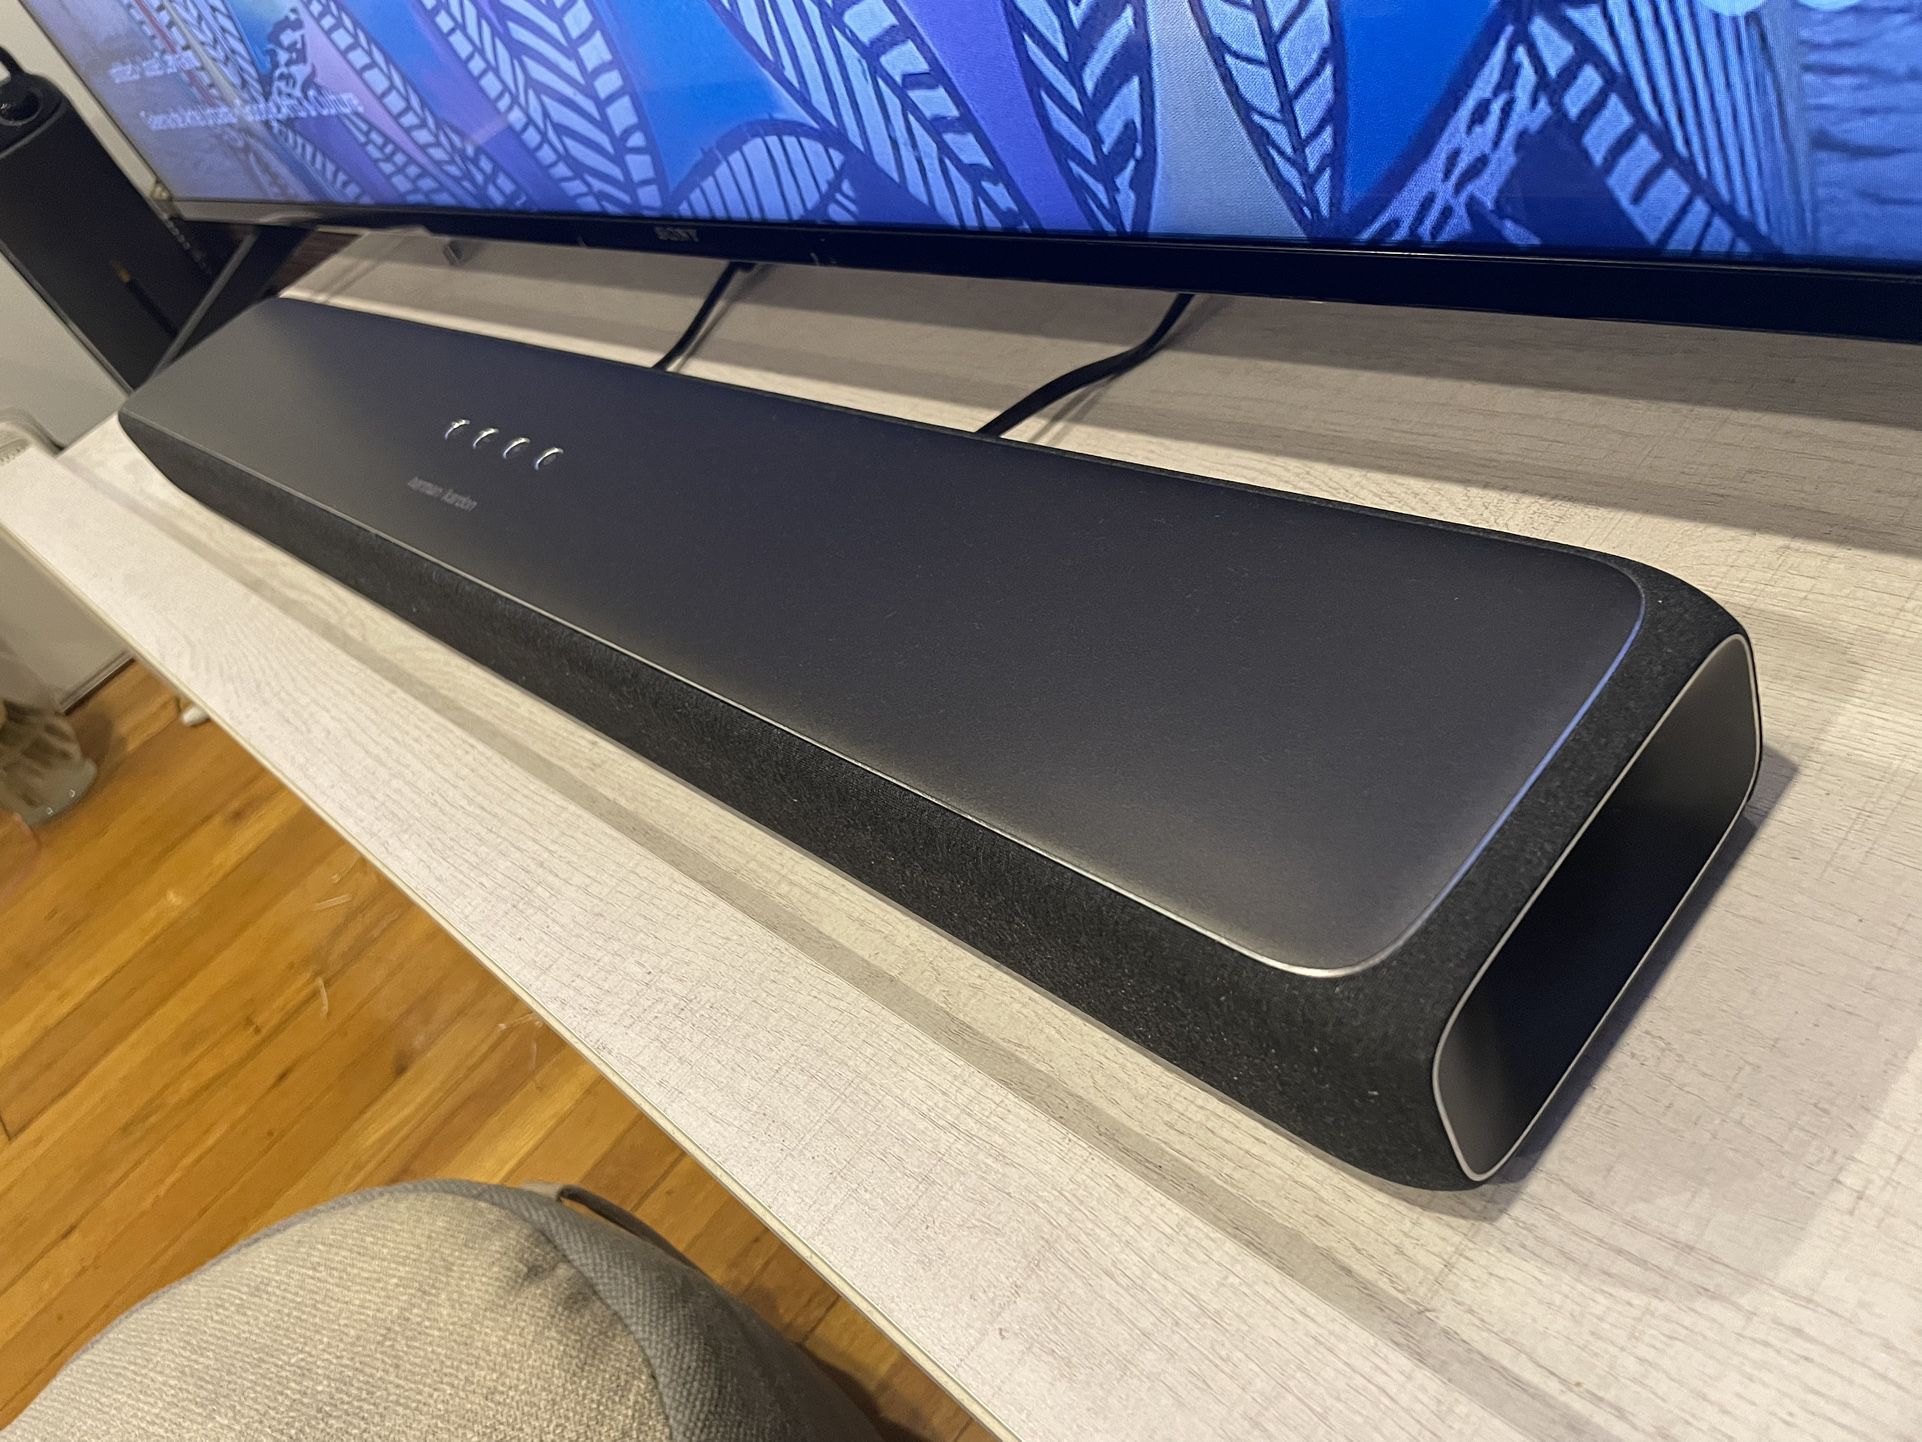 Harman Kardon Enchant 800 TV Bar With Bluetooth And Remote Control for Sale in Brooklyn, NY - OfferUp